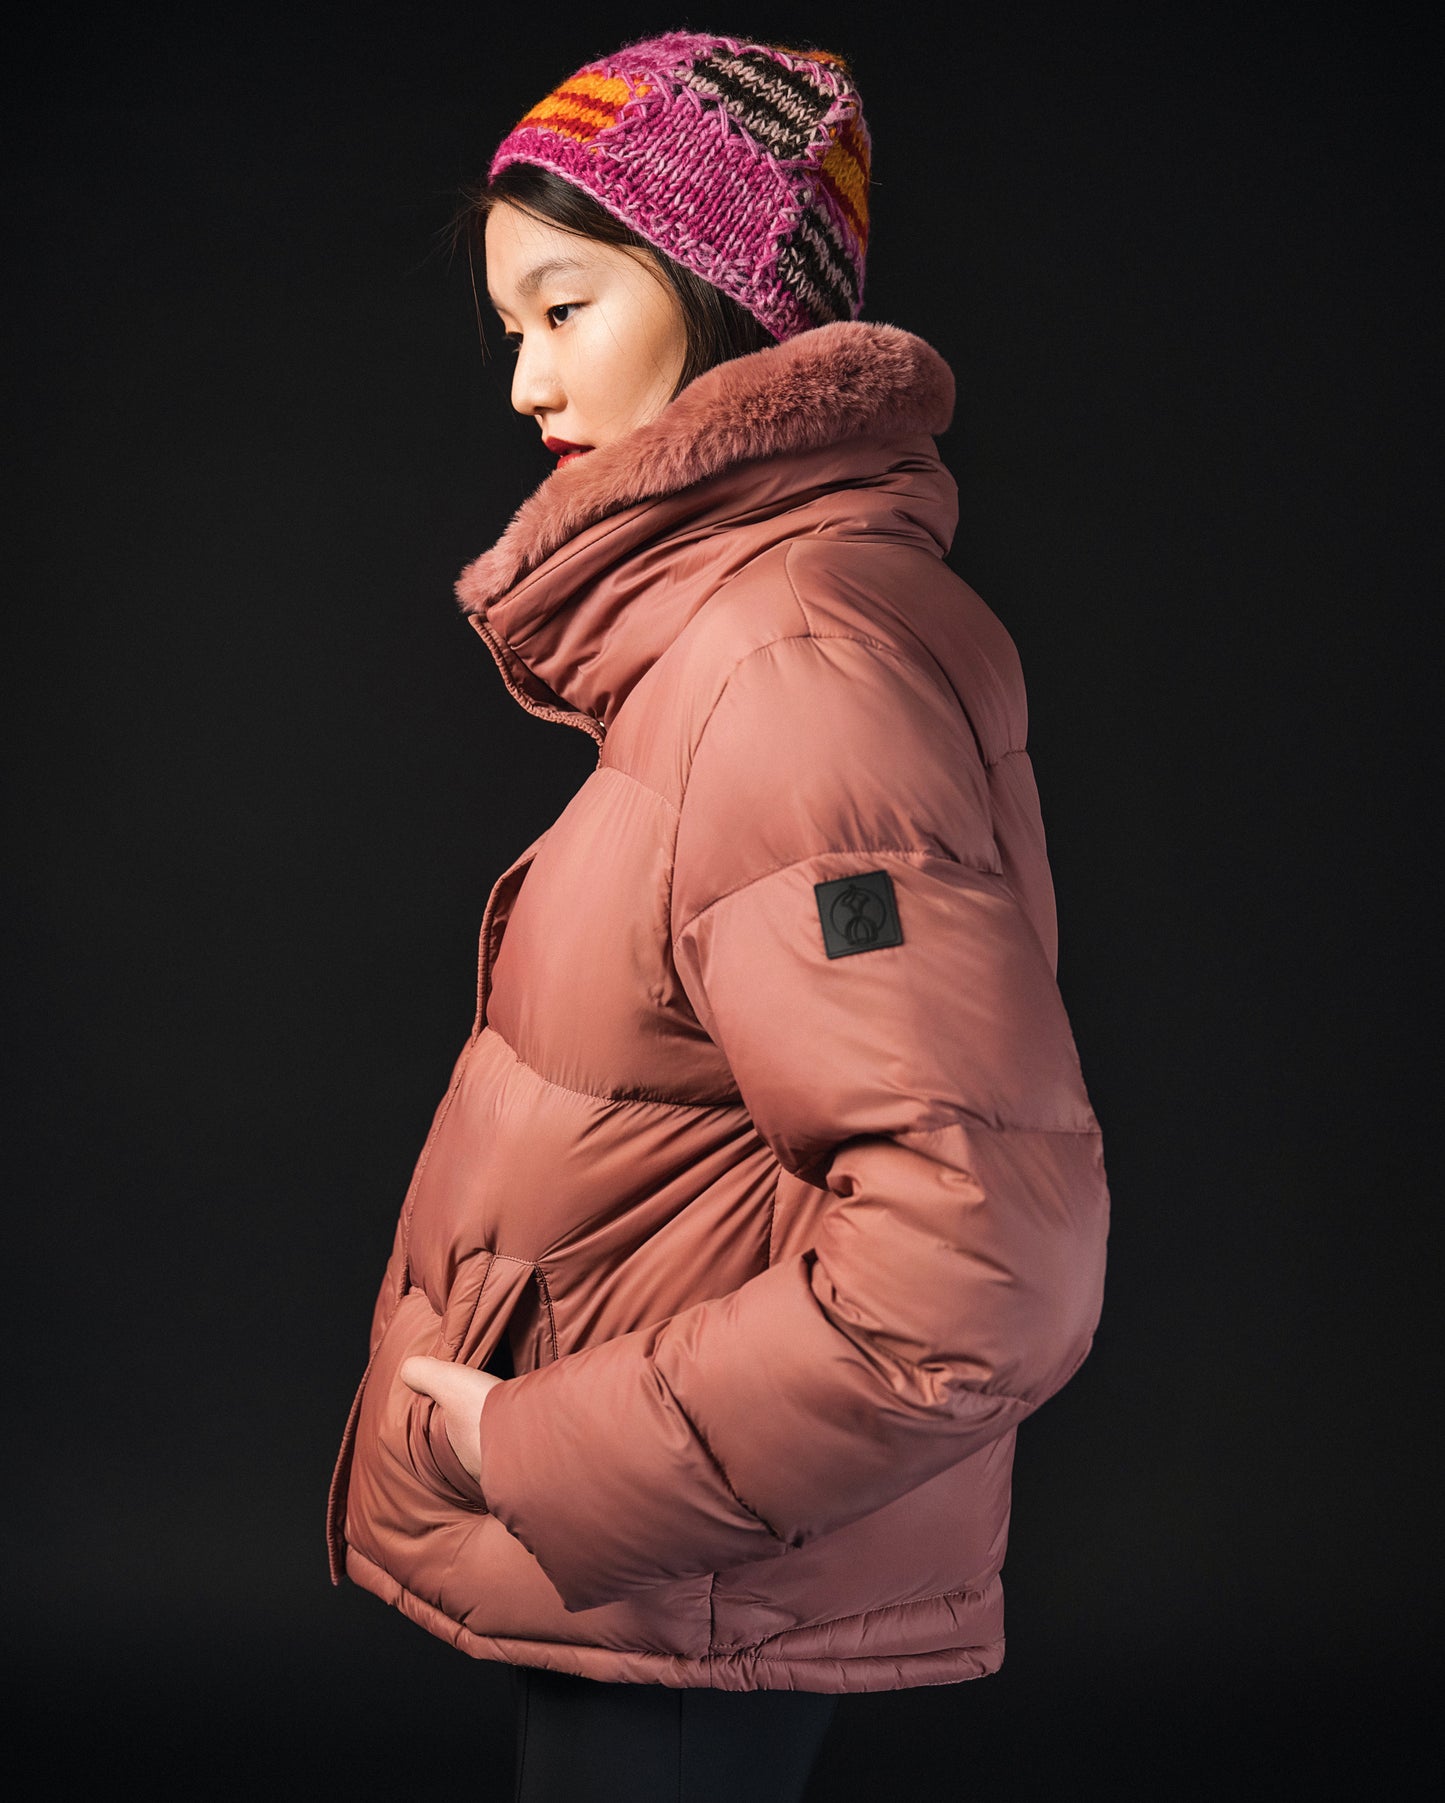 Quilted Puffer Jacket with Fur Collar